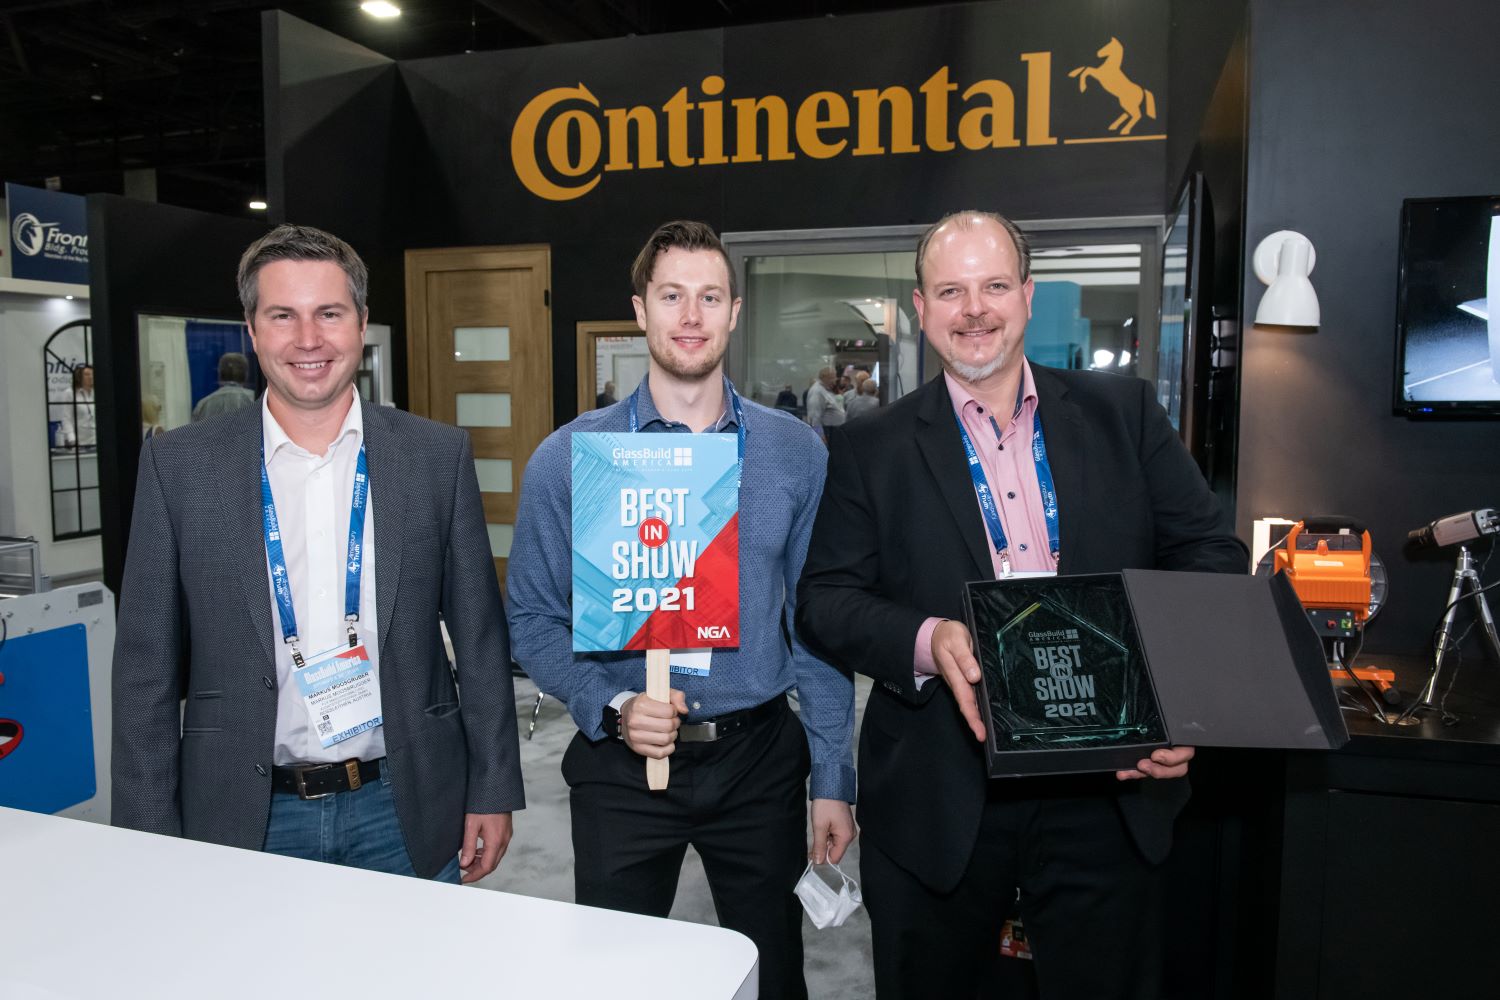 Three happy members of Continental team hold GlassBuild Best in Show Award